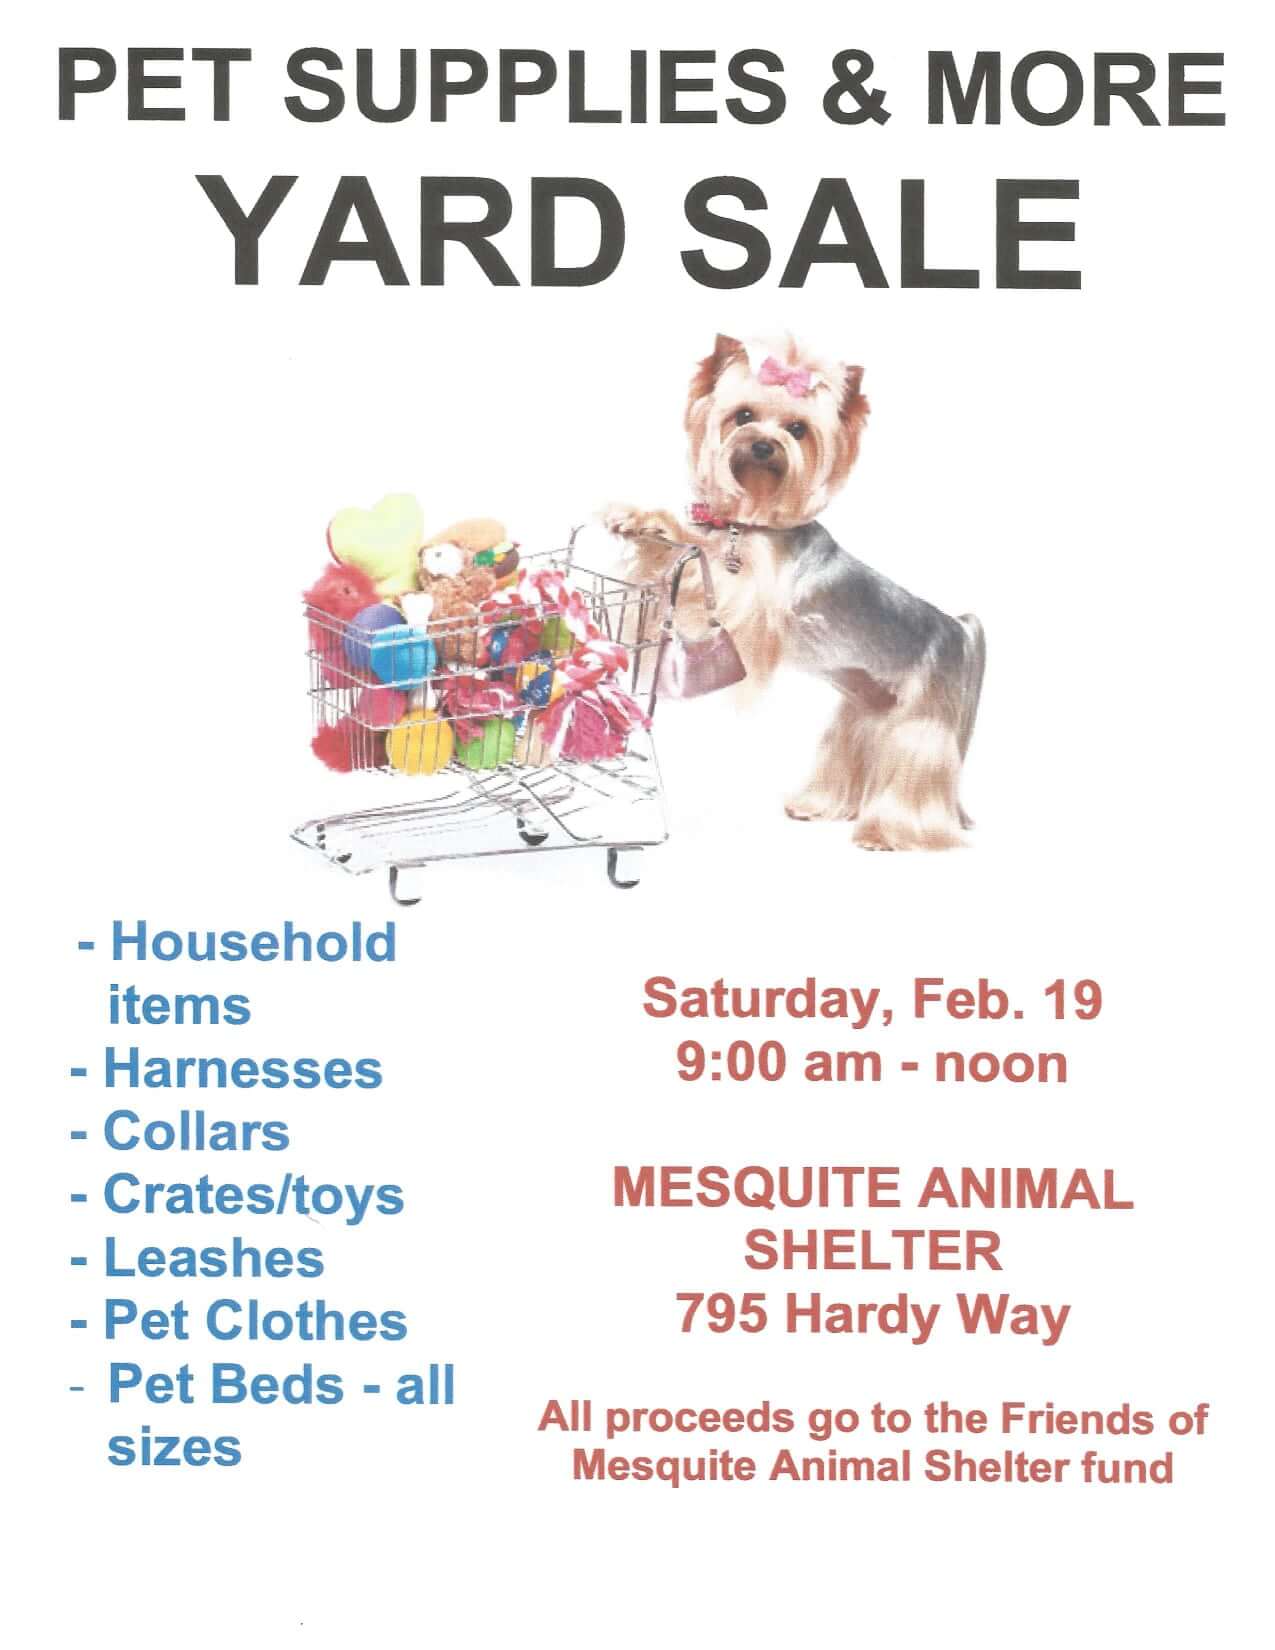 Friends of Mesquite Animal Shelter Yard Sale Feb 19th | Mesquite Local News